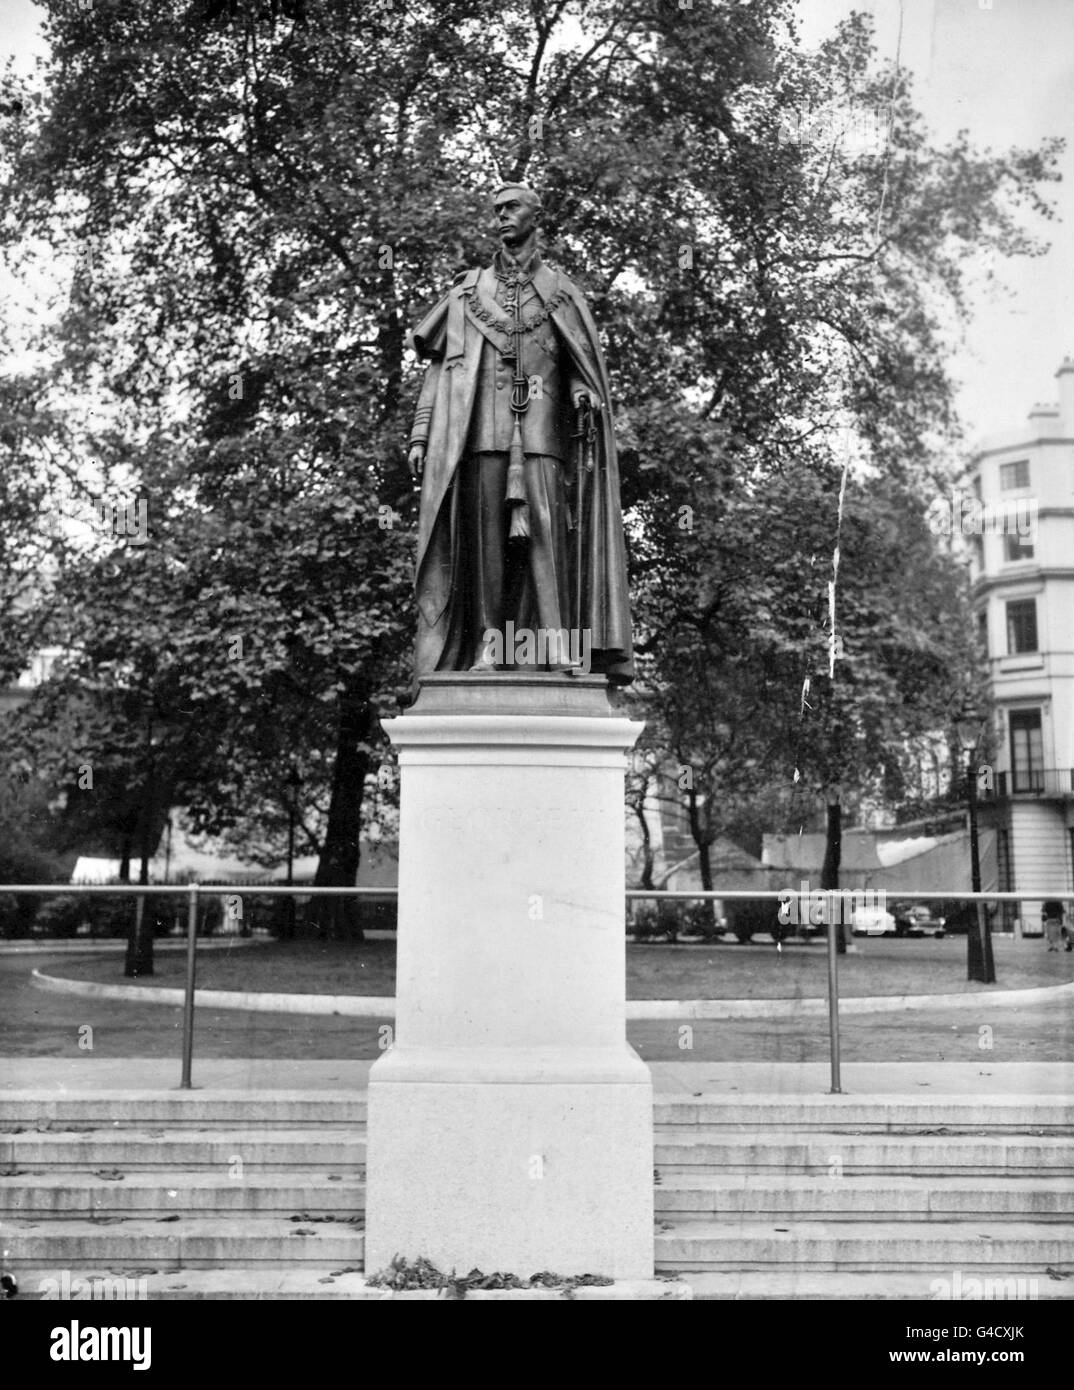 A statue of King George VI in his Garter robes, erected just off The Mall and Carlton Gardens in London. It is sculpted in bronze by William McMillan Stock Photo